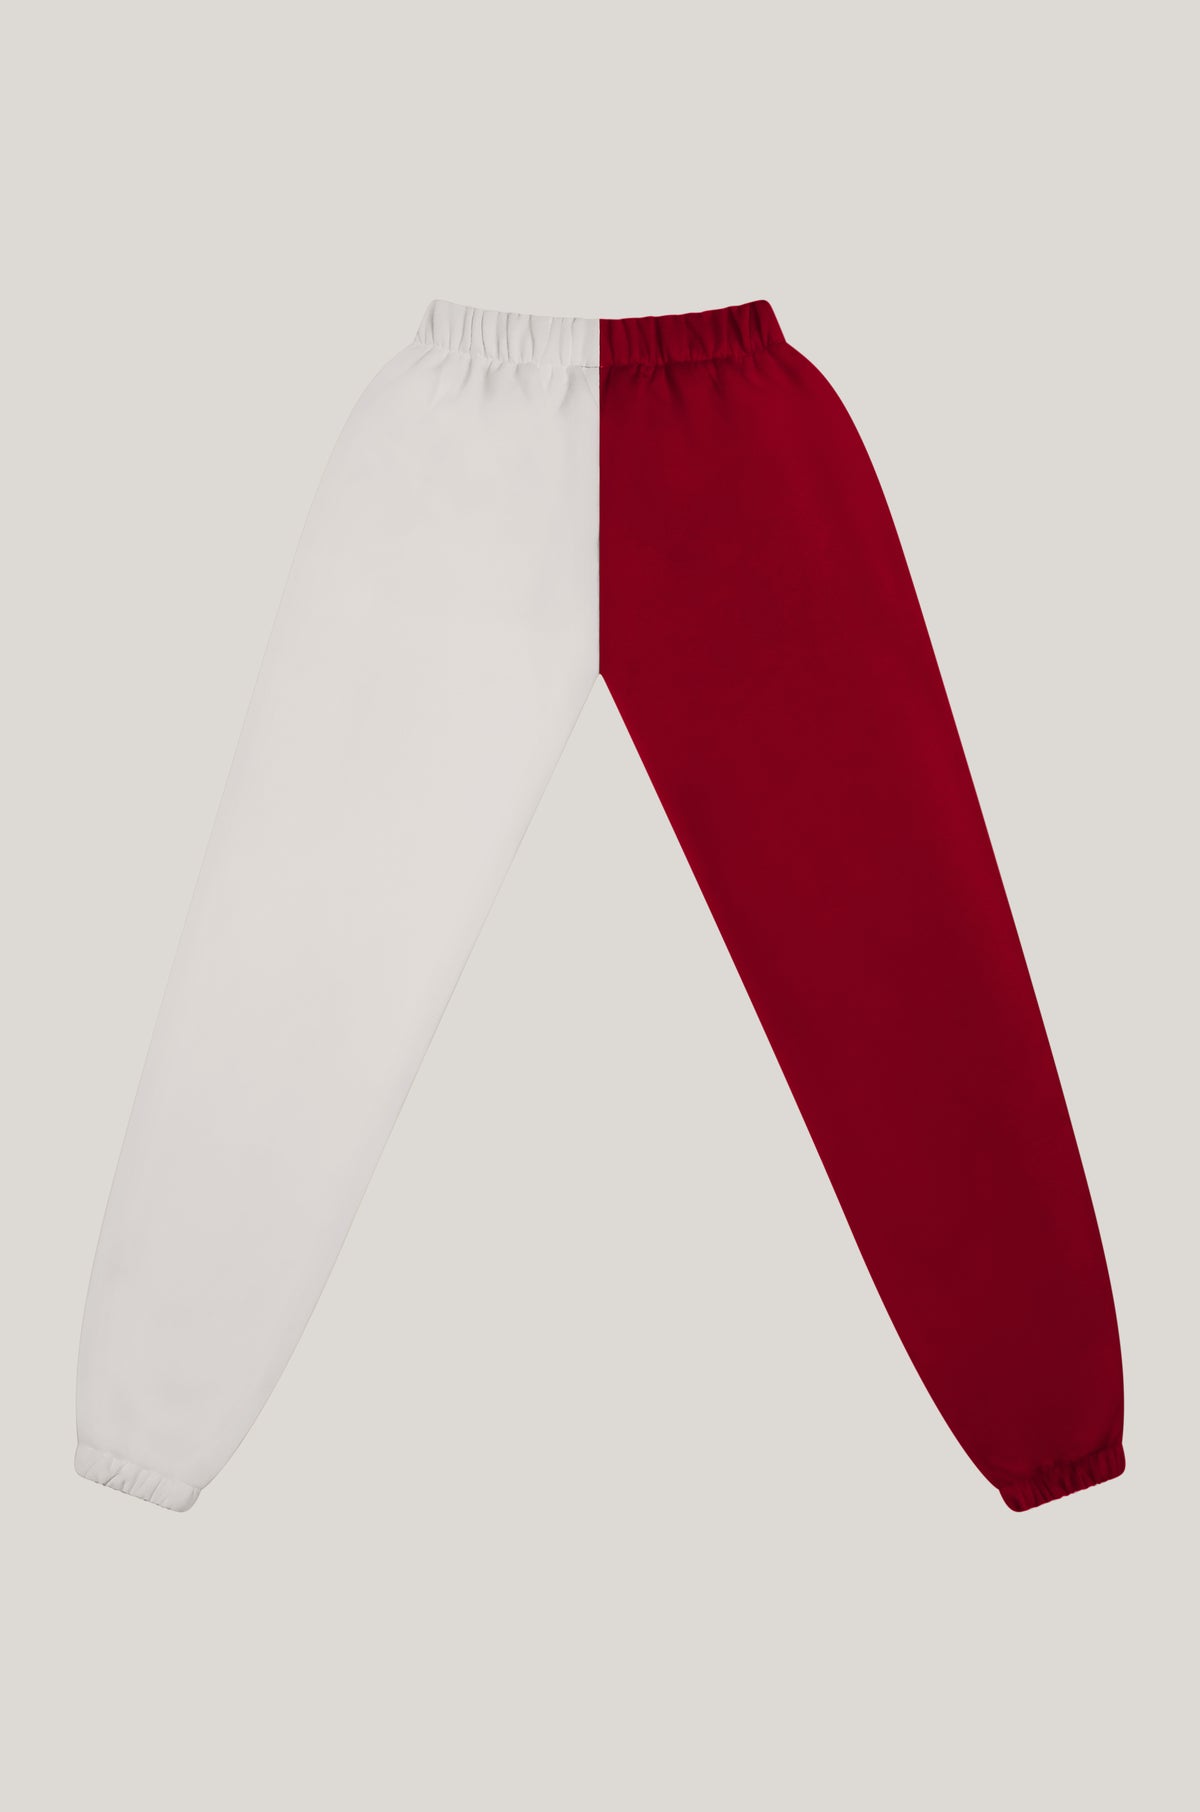 Stanford Color-Block Sweats